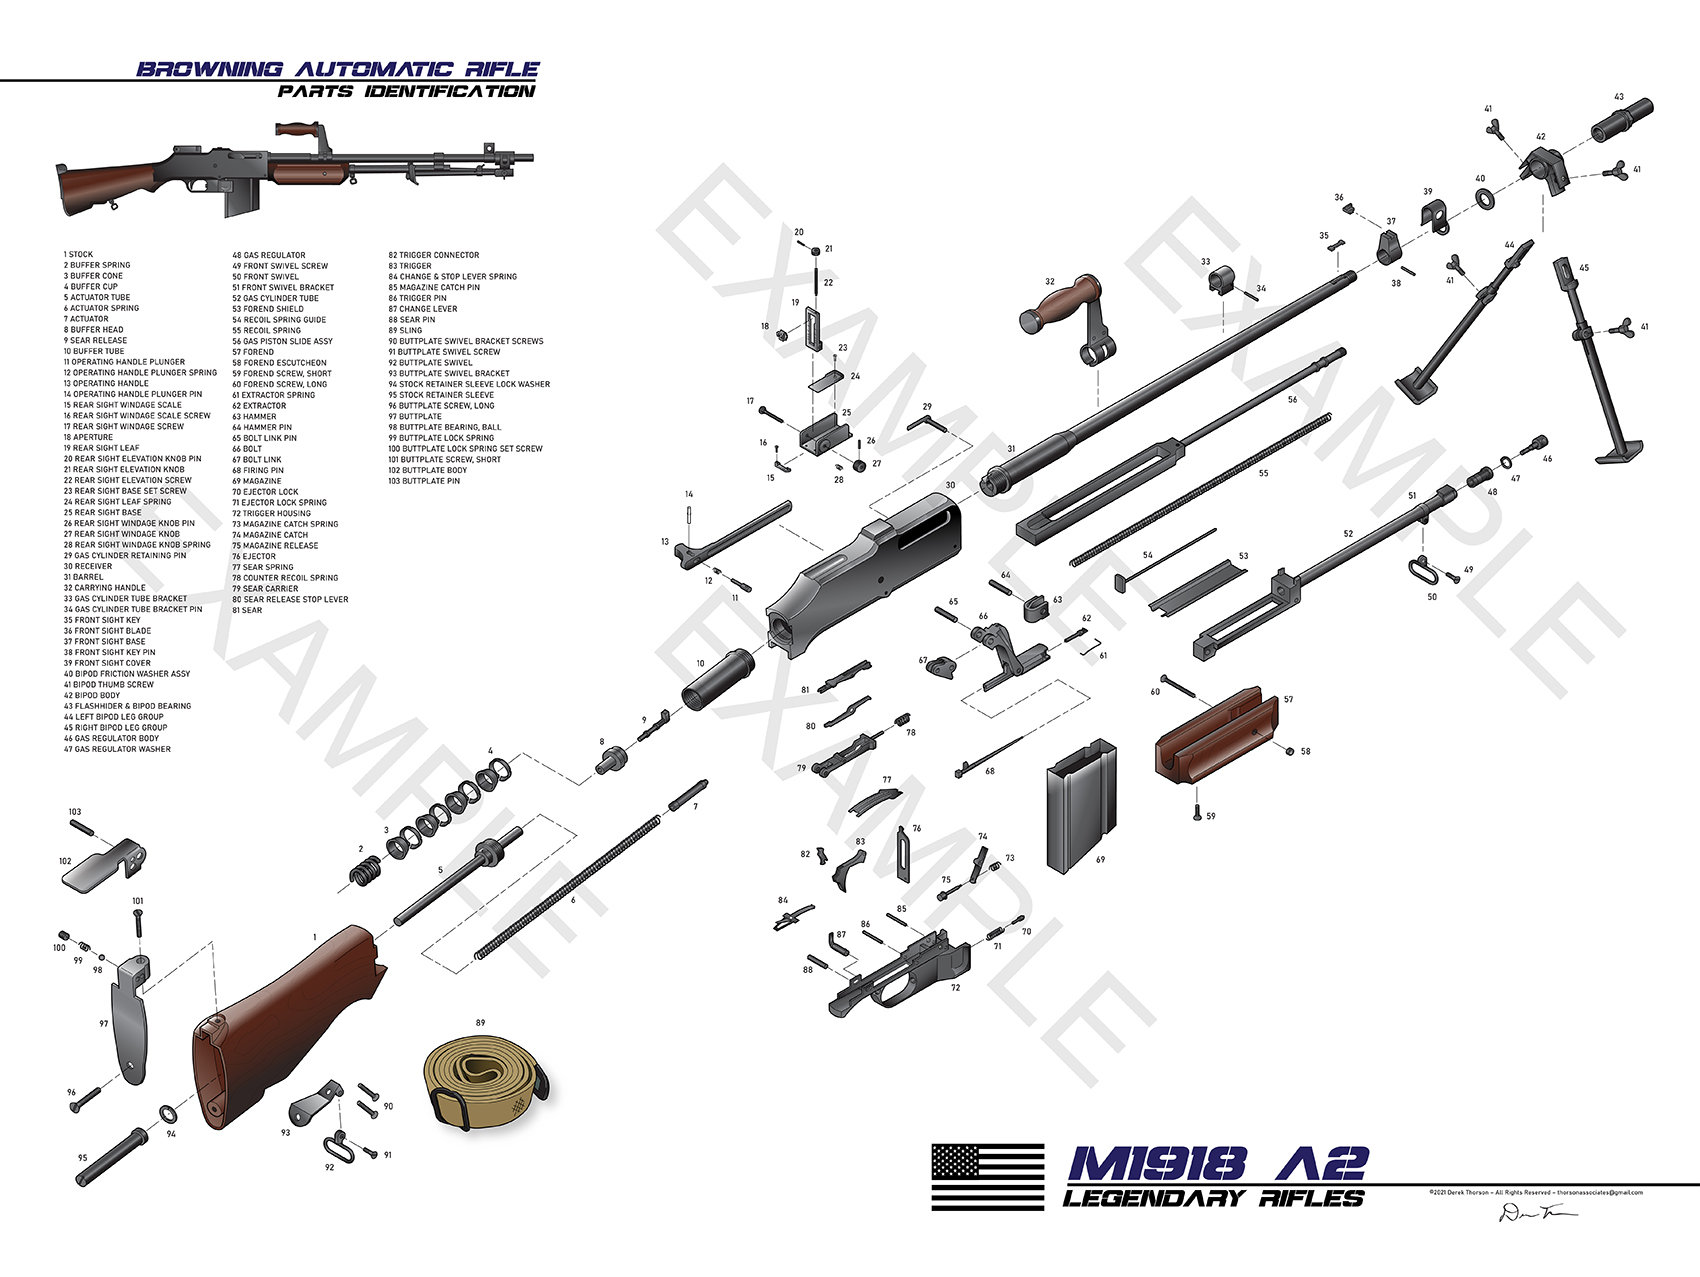 Browning Automatic Rifle Bar Exploded View Limited Edition Poster Art